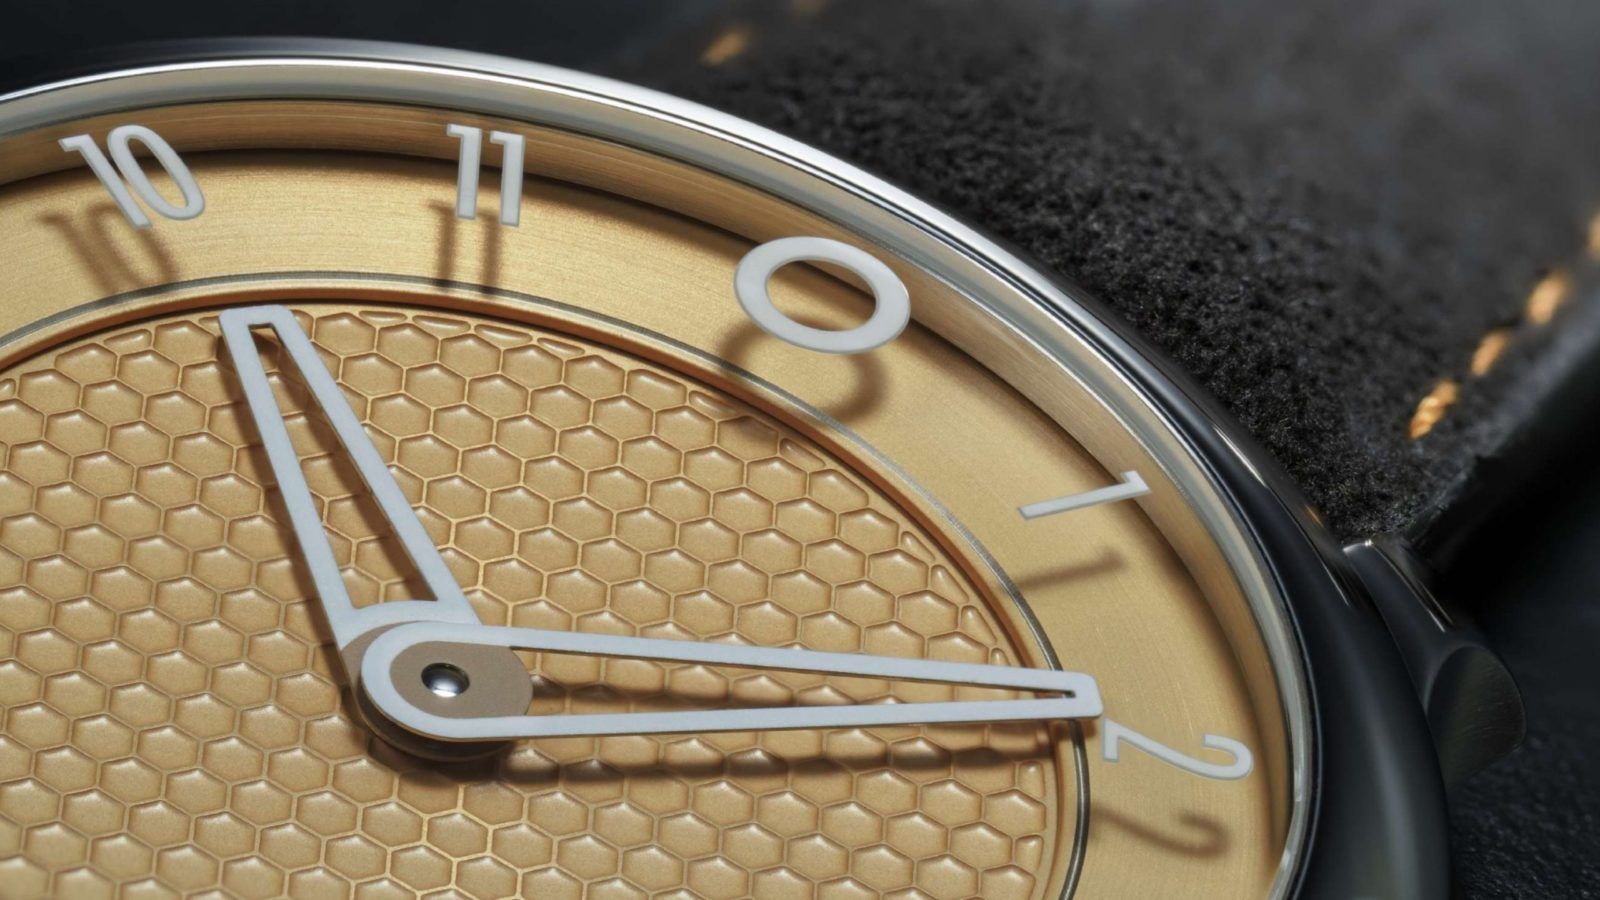 Massena Lab’s new collaboration timepiece with MING has a honeycomb dial